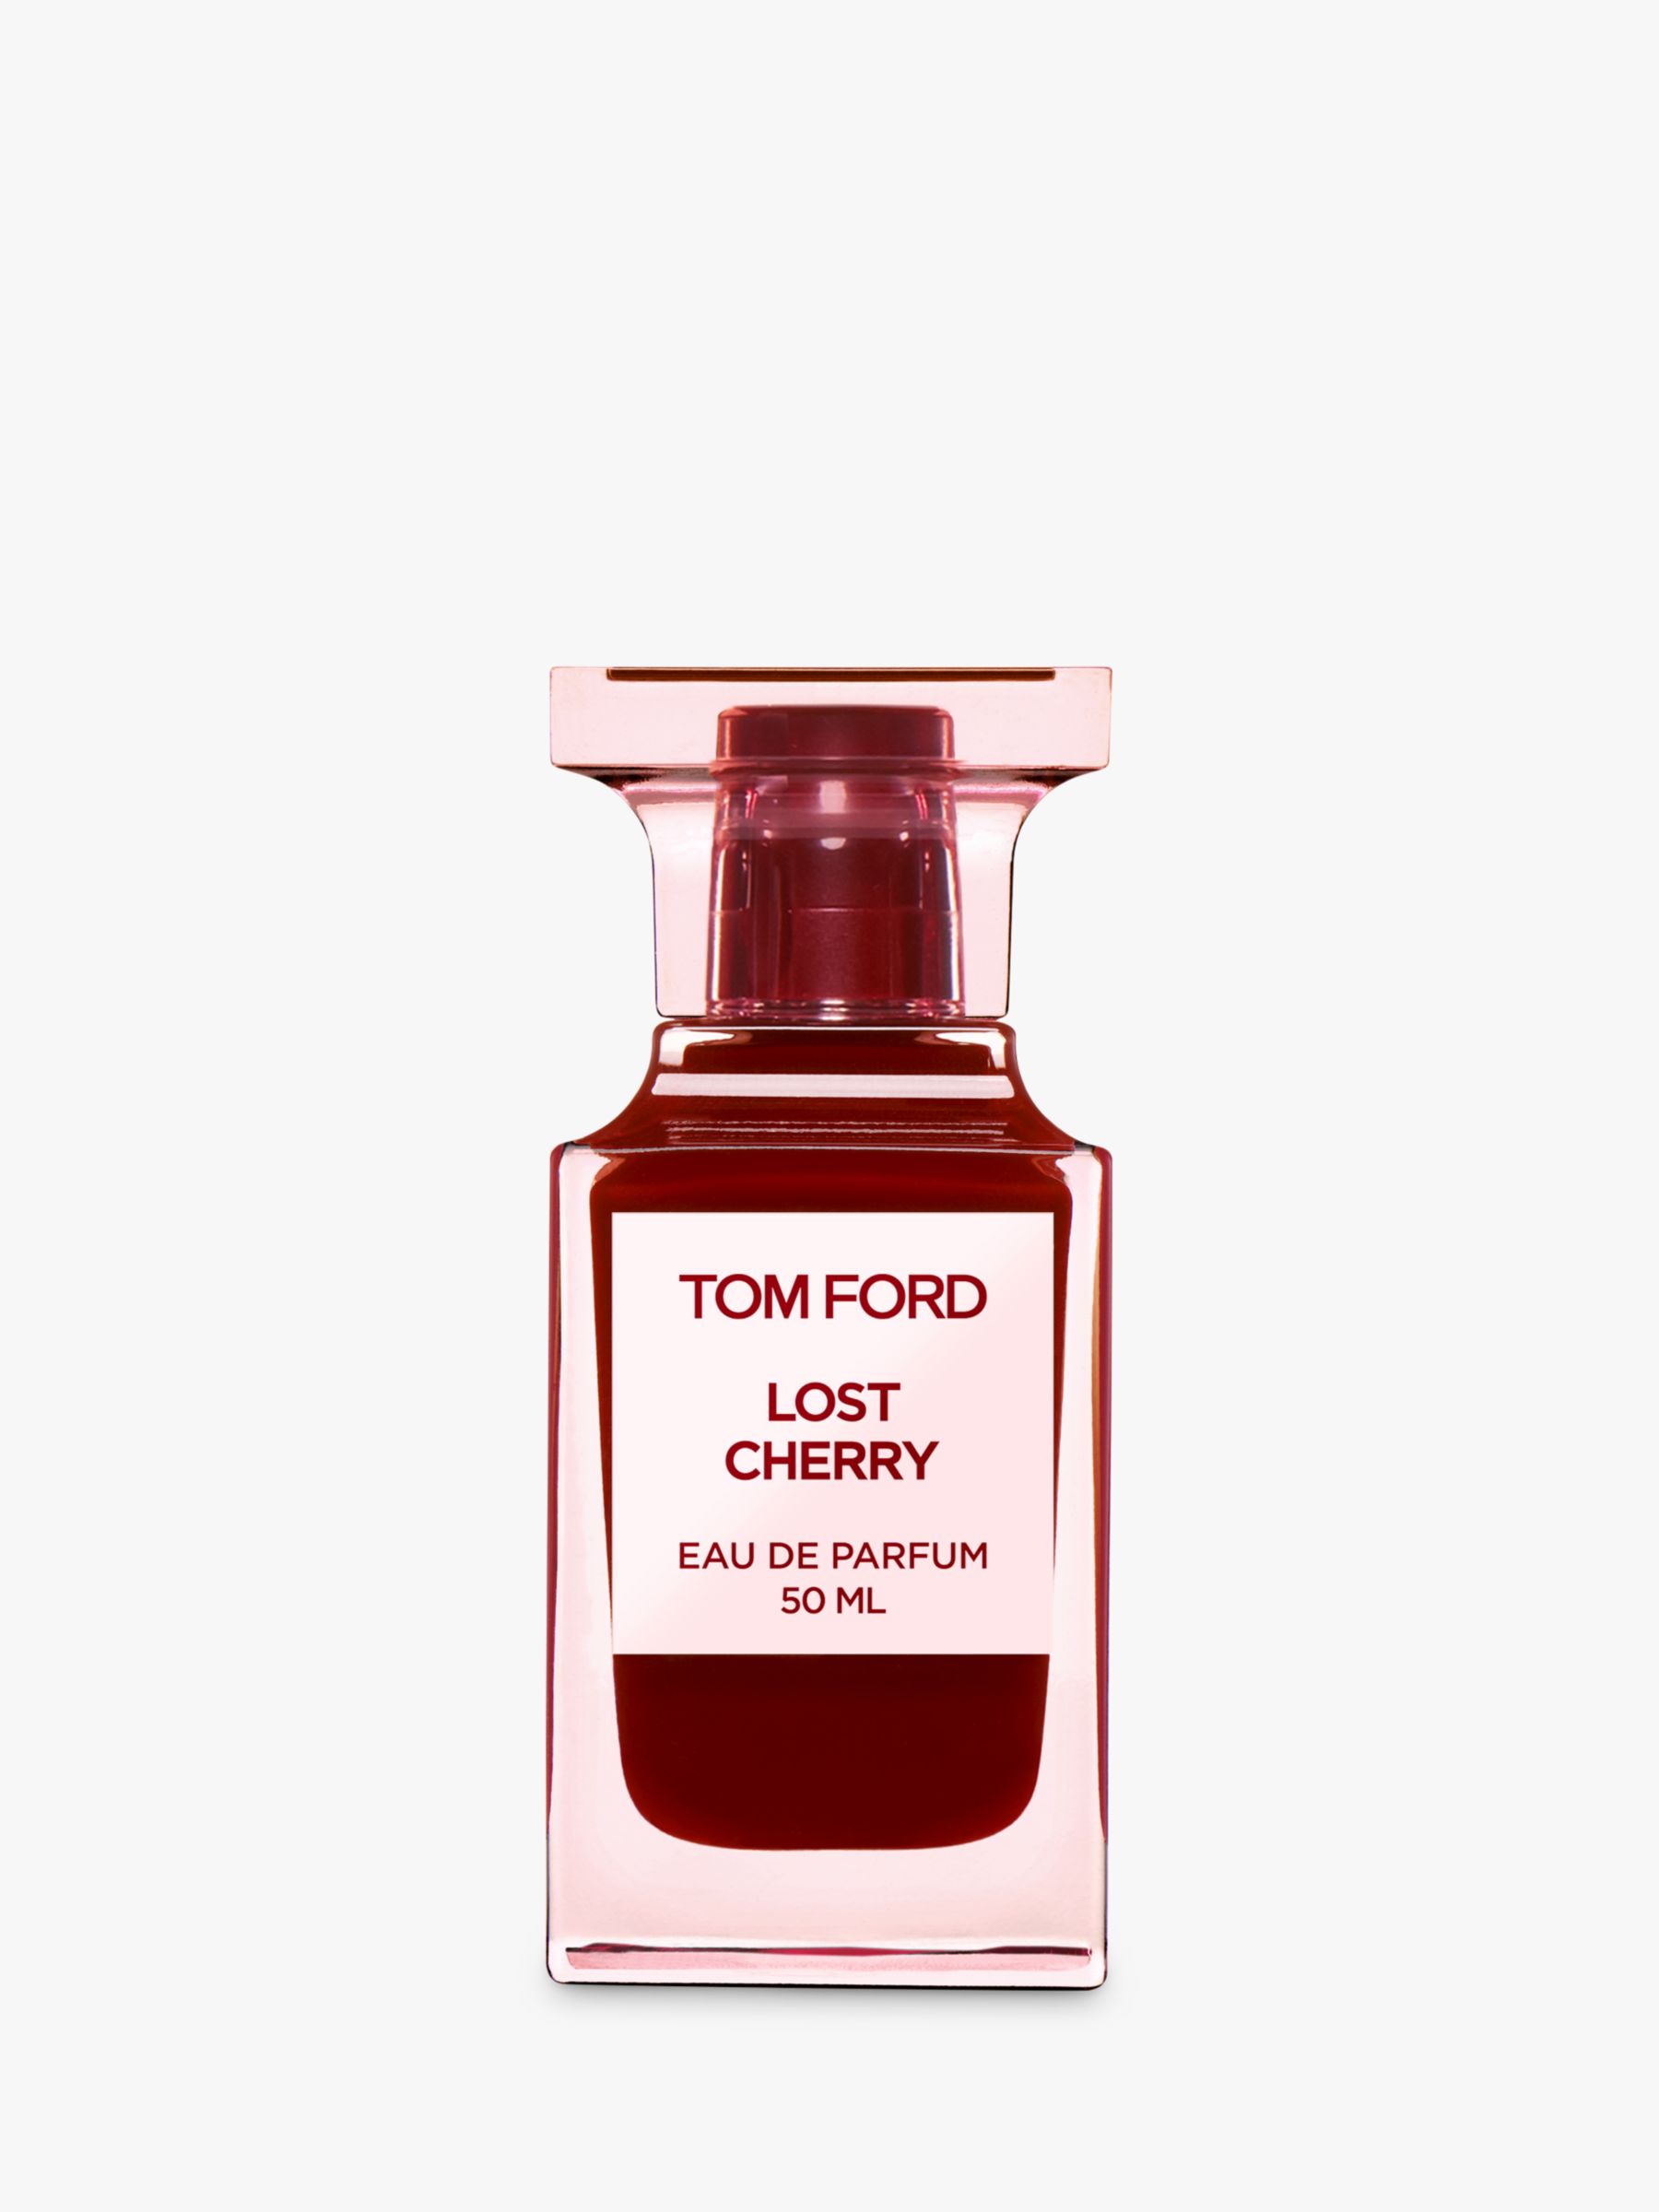 Top 36+ imagen is tom ford lost cherry worth it